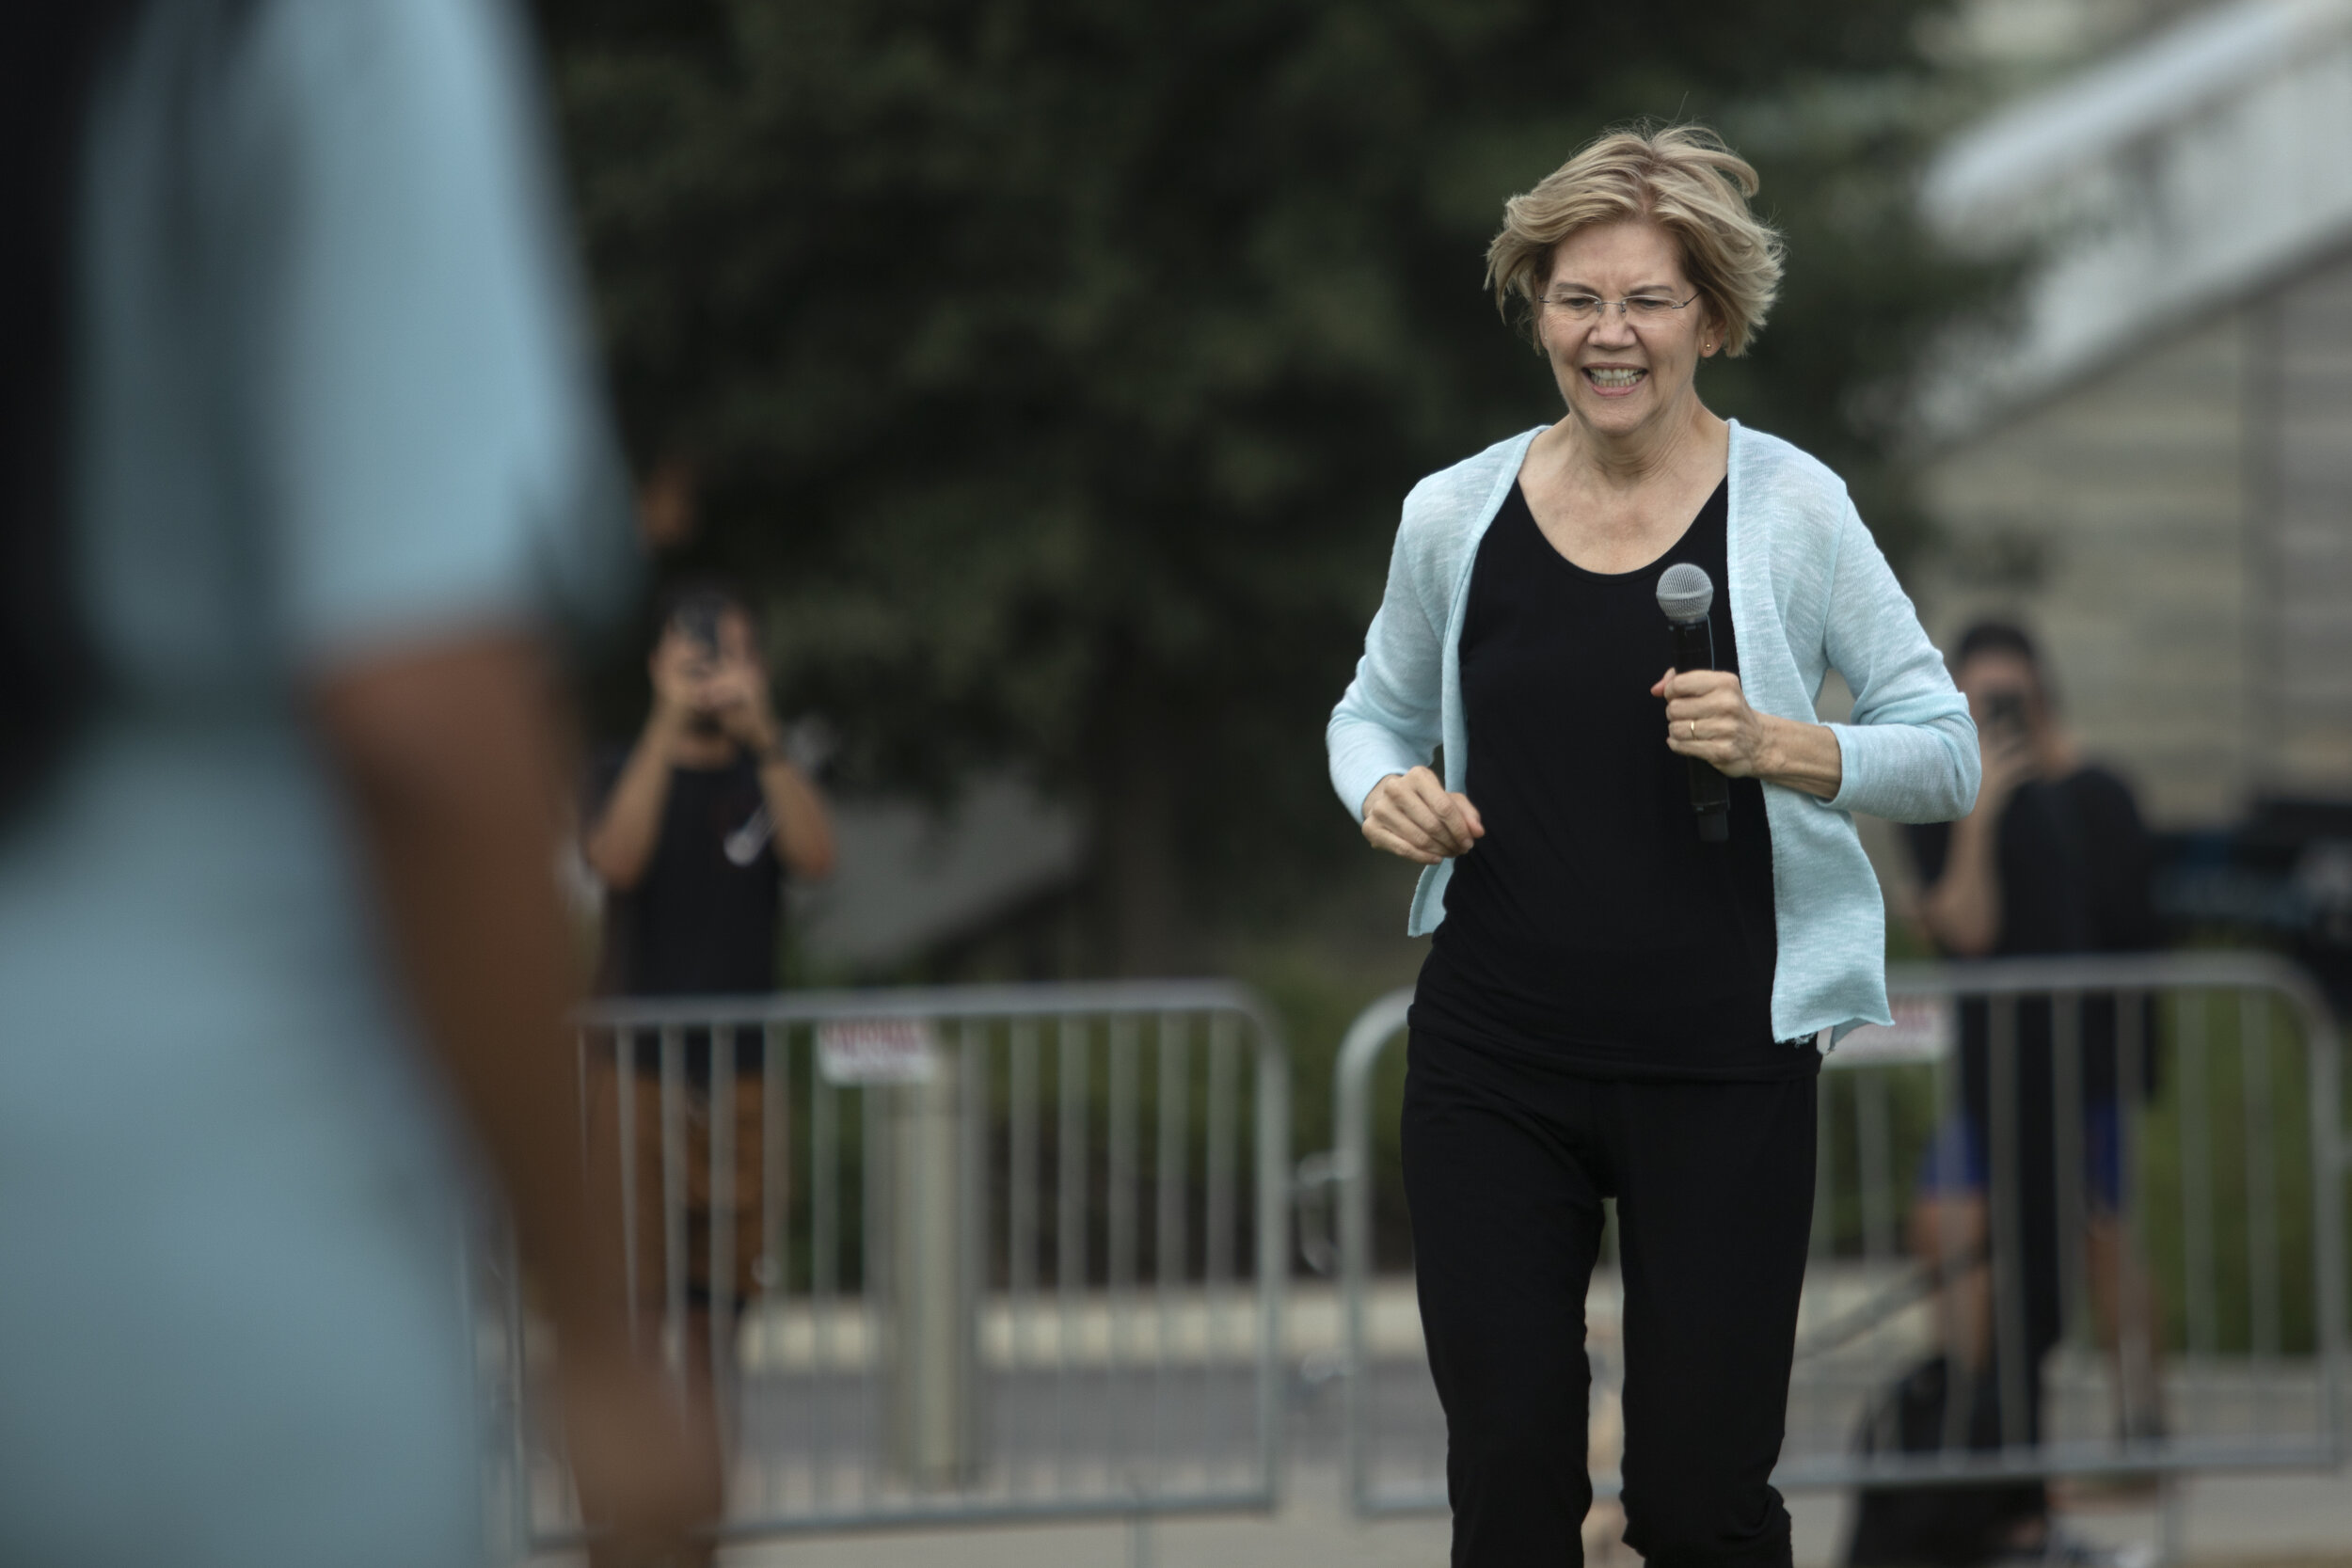  AUSTIN, TX. Elizabeth Warren runs to take the stage during a rally at Auditorium Shores. 